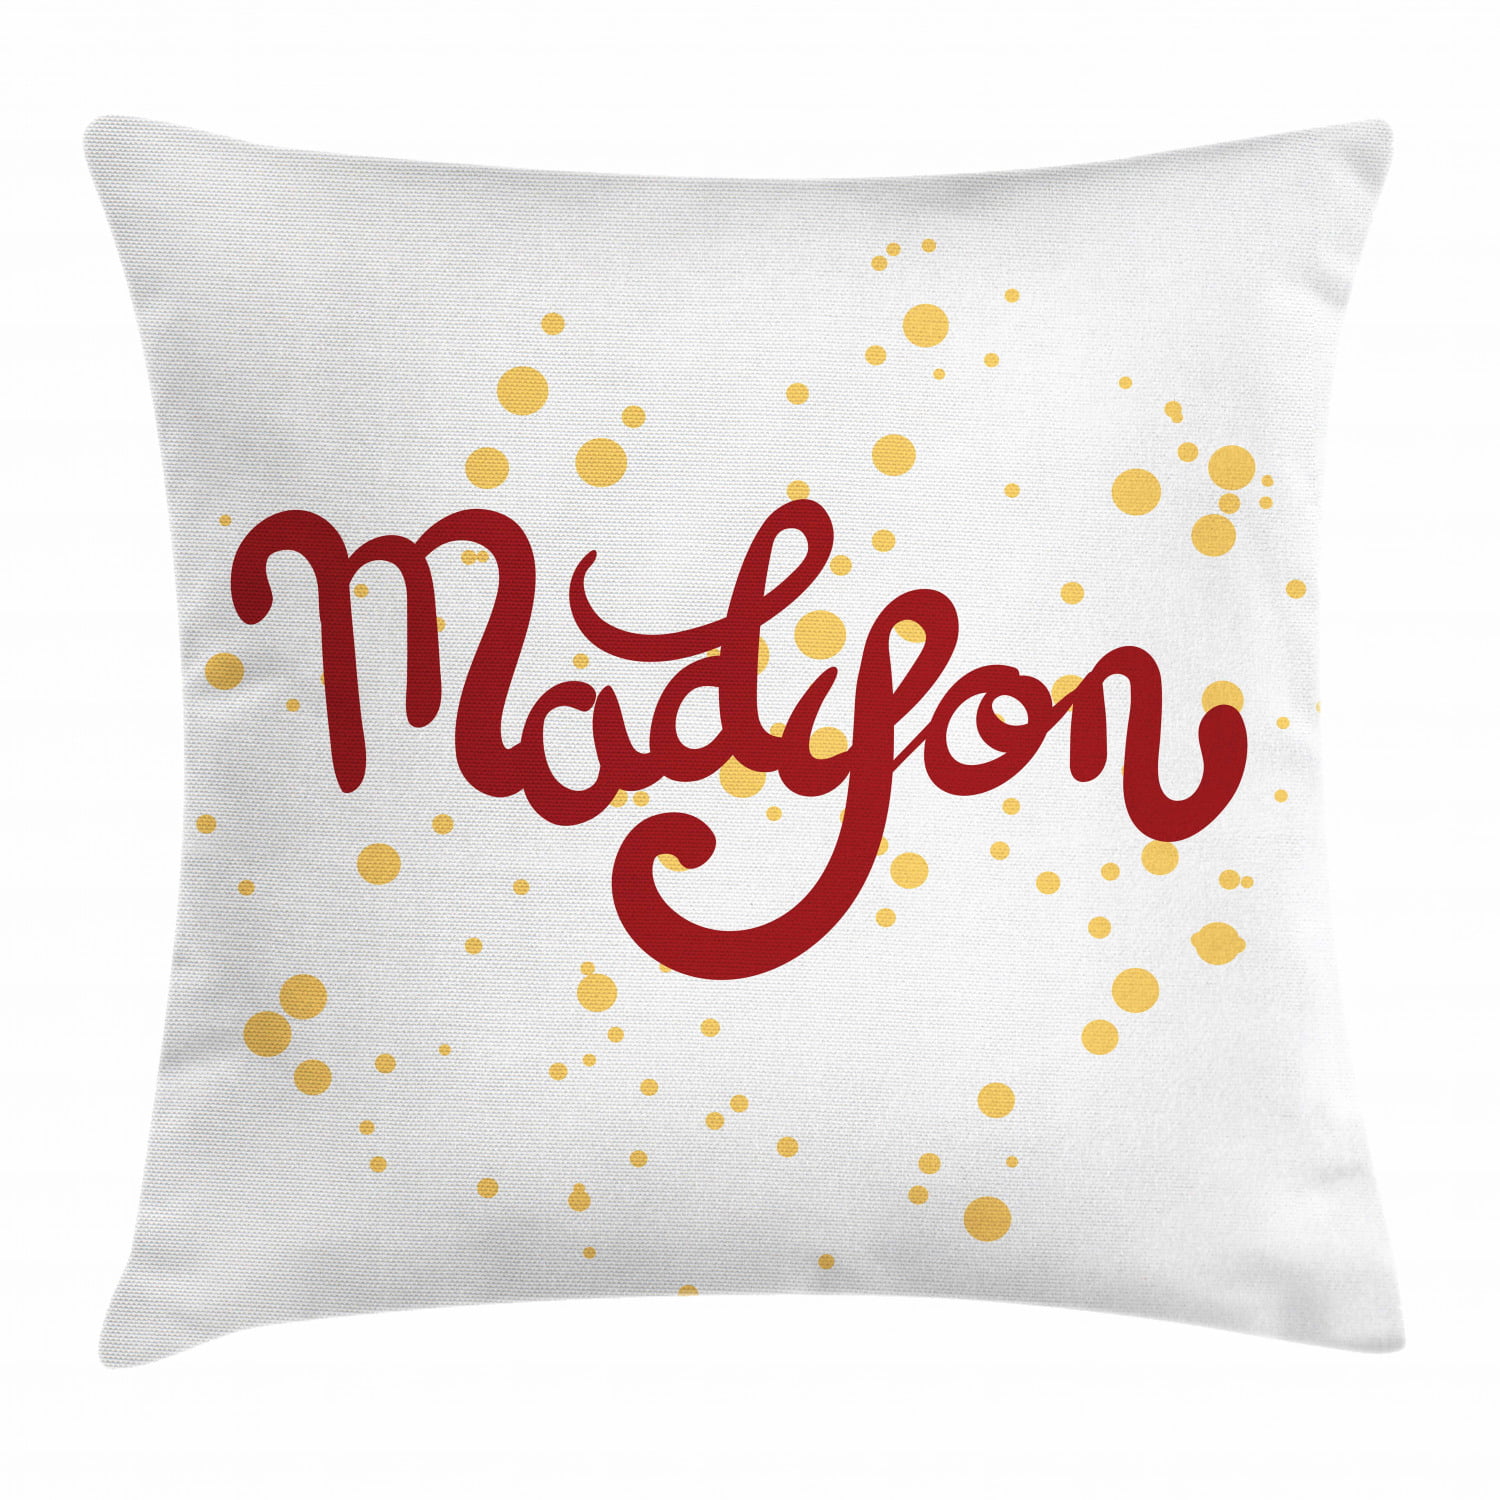 or custom color pillow cover Personalized off white burlap square letter RED 